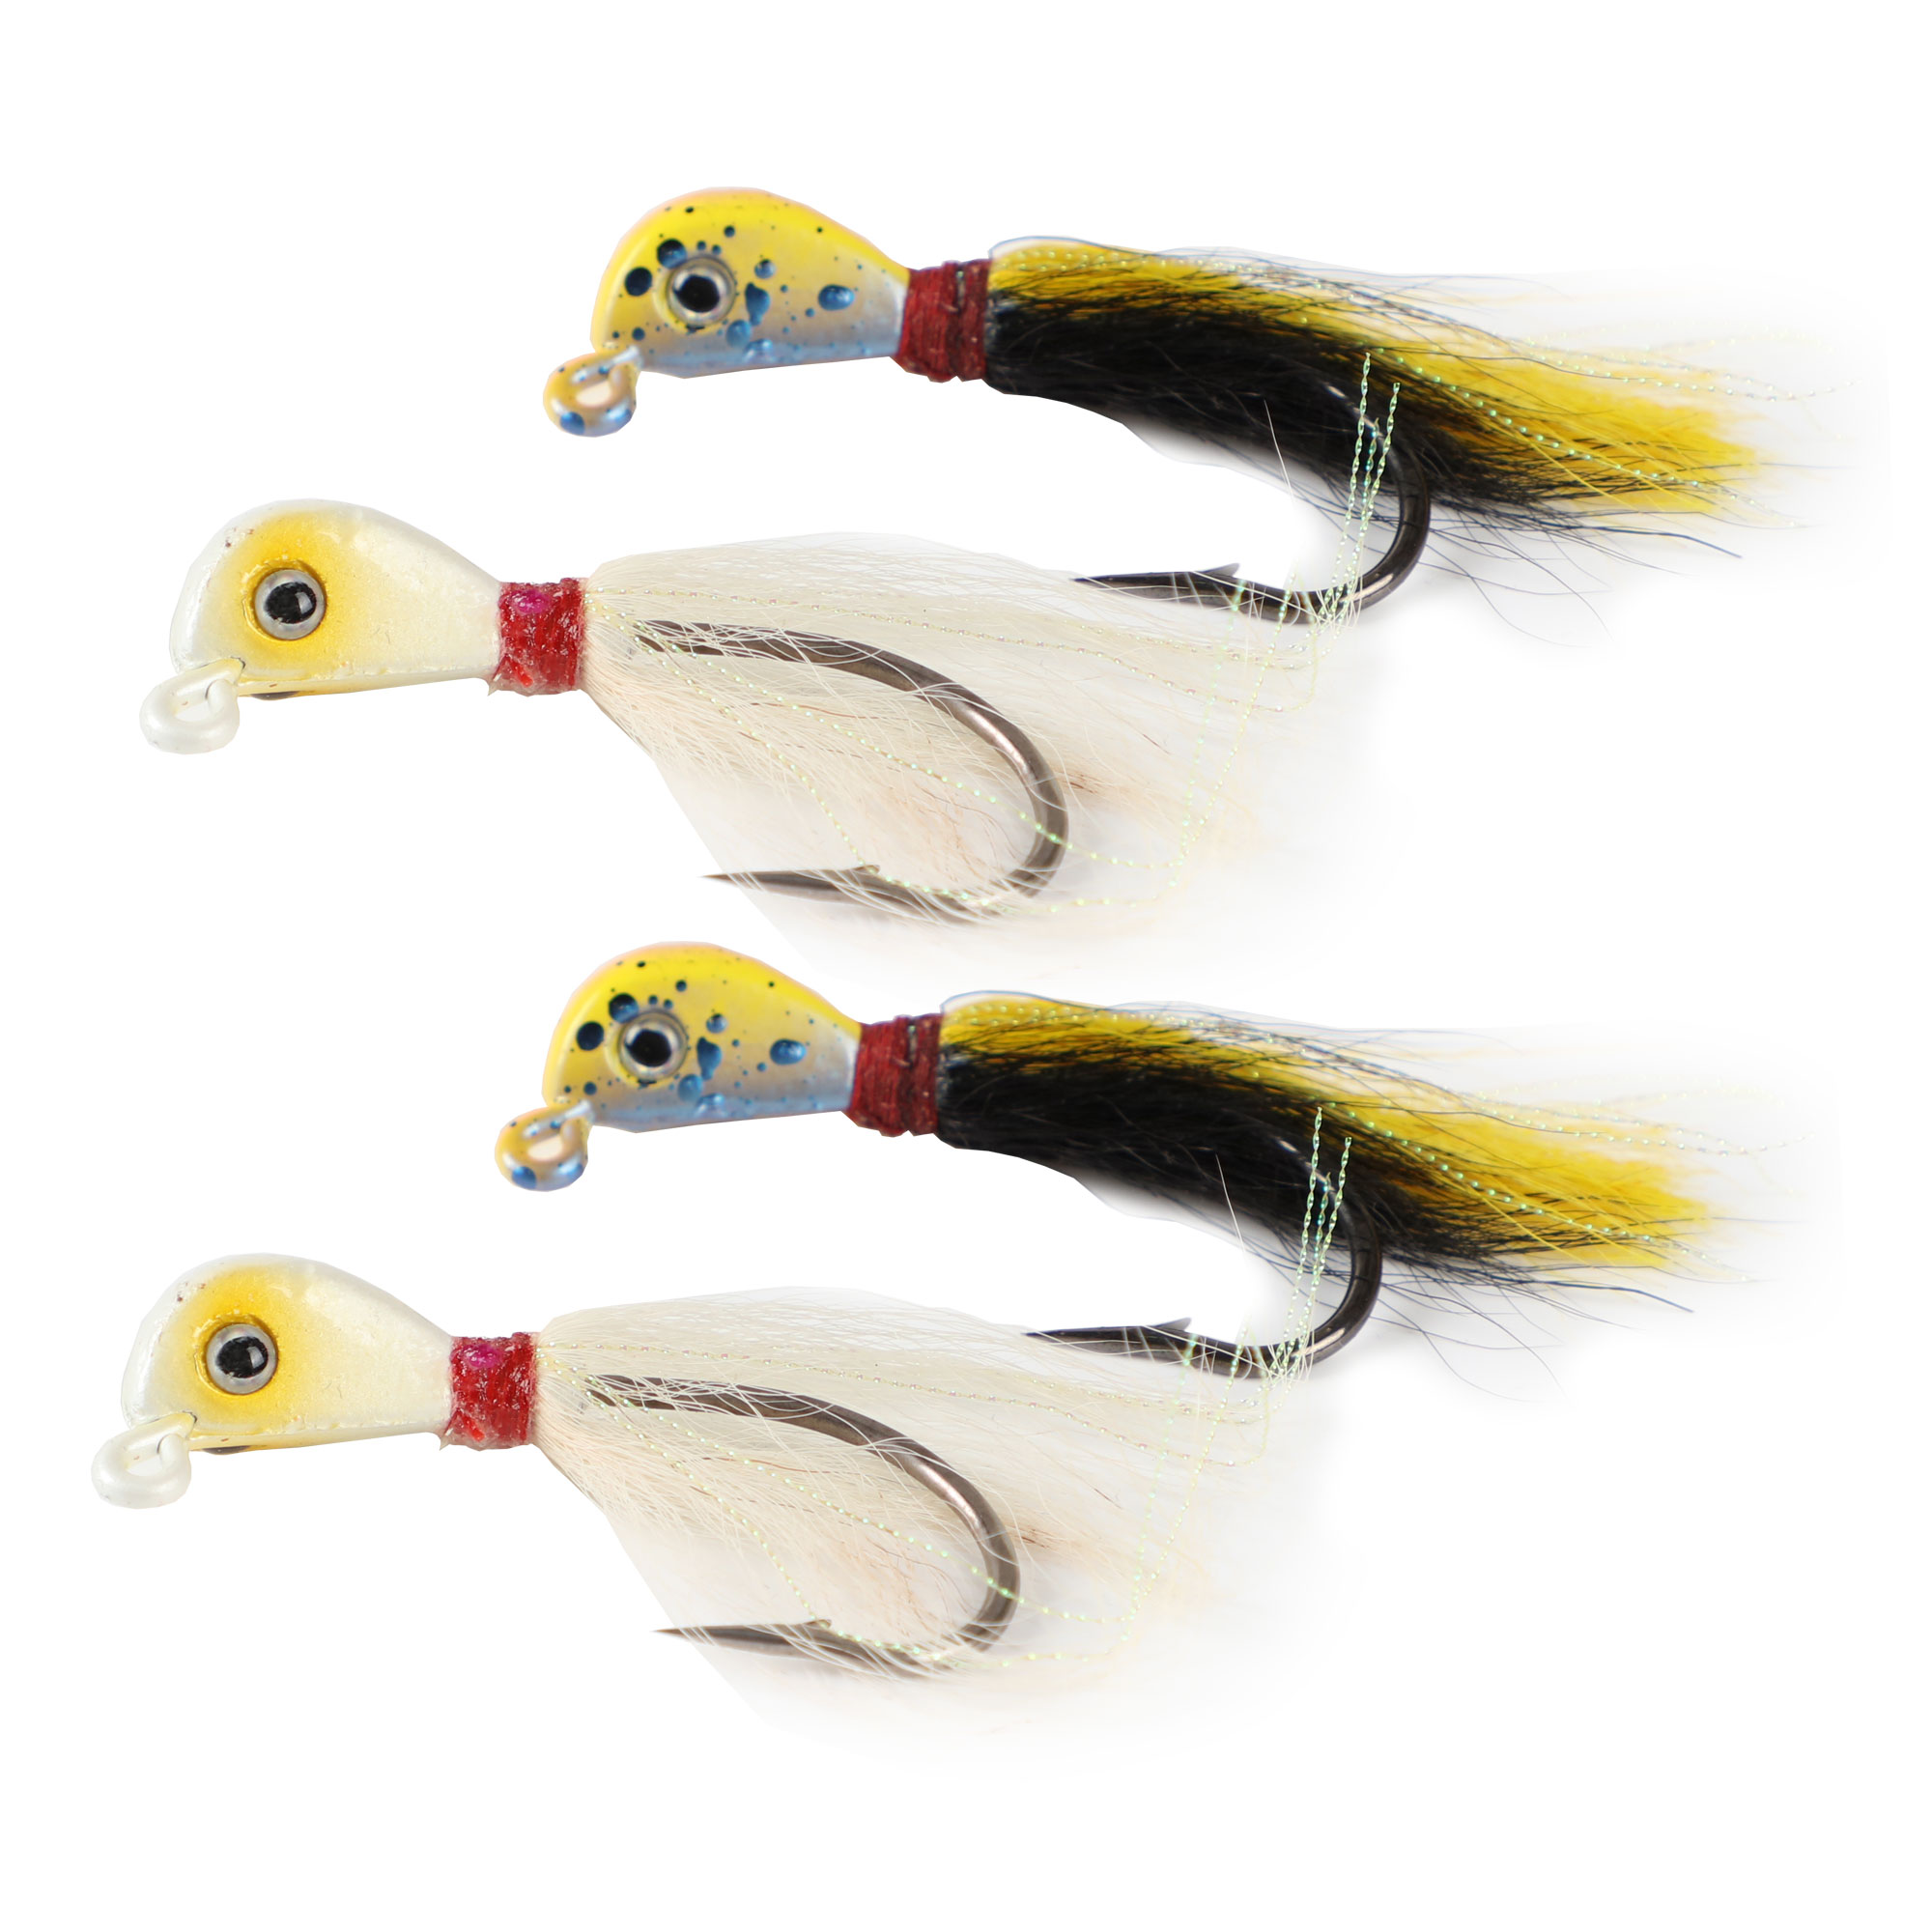 FREE FISHER 4pcs/pack Jig Head Fishing Lure with Feather Skirt Lead jig Lead Fish Jigging Lures Artificial Baits Fishing Tackle 7.5cm 25g 